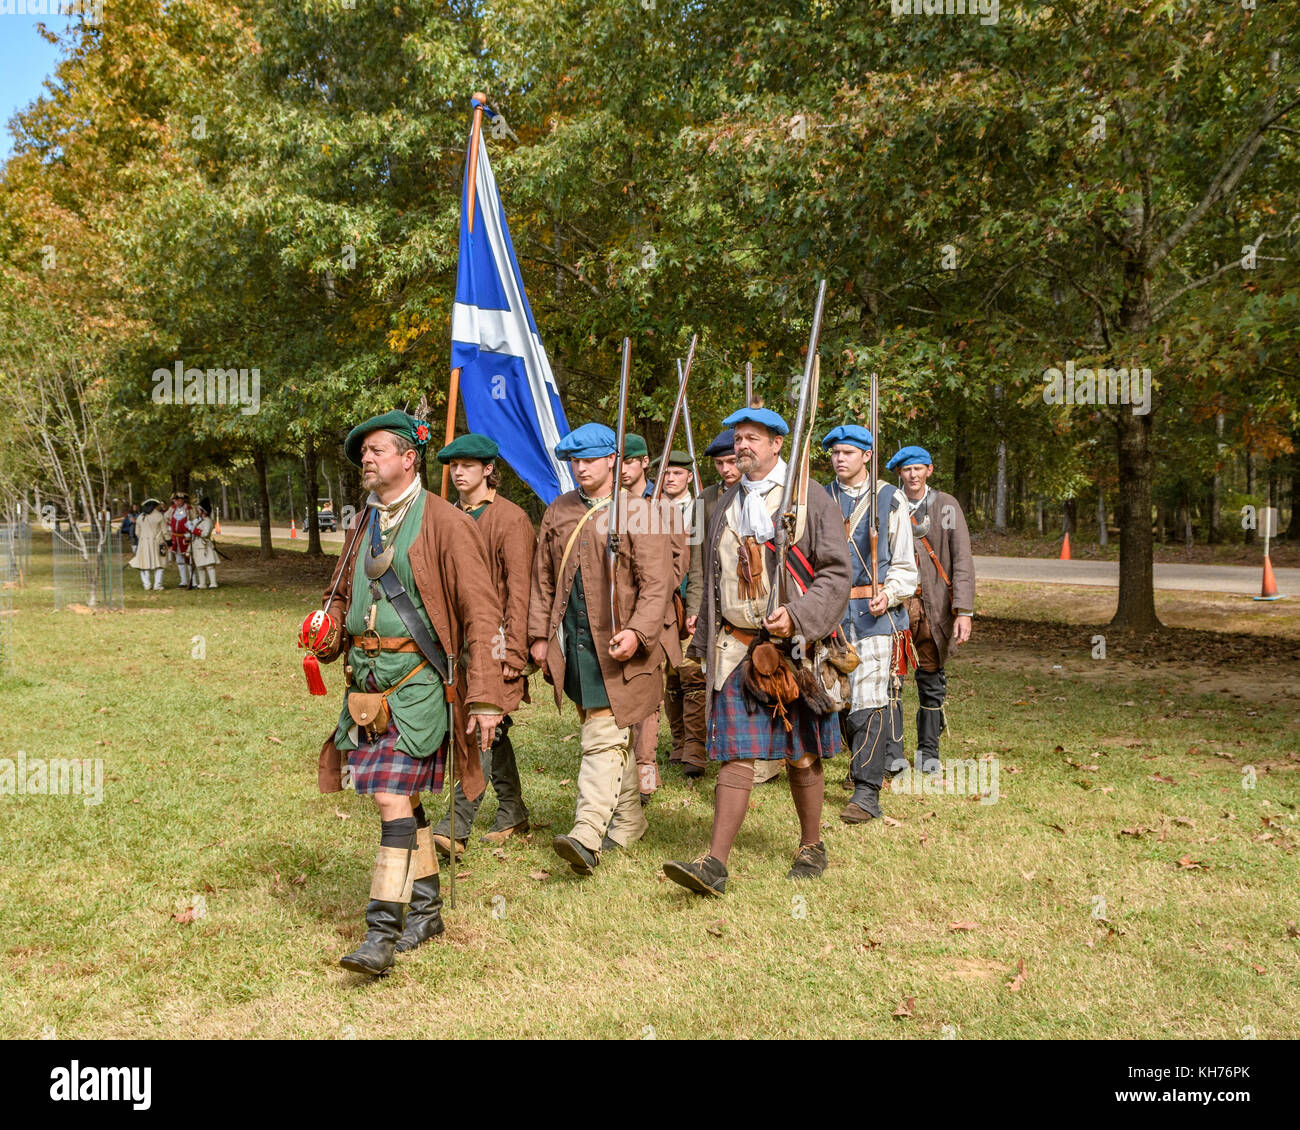 Reenactment actors dressed as Scottish army soldiers of the early 1700's marching with the flag of Scotland. Stock Photo